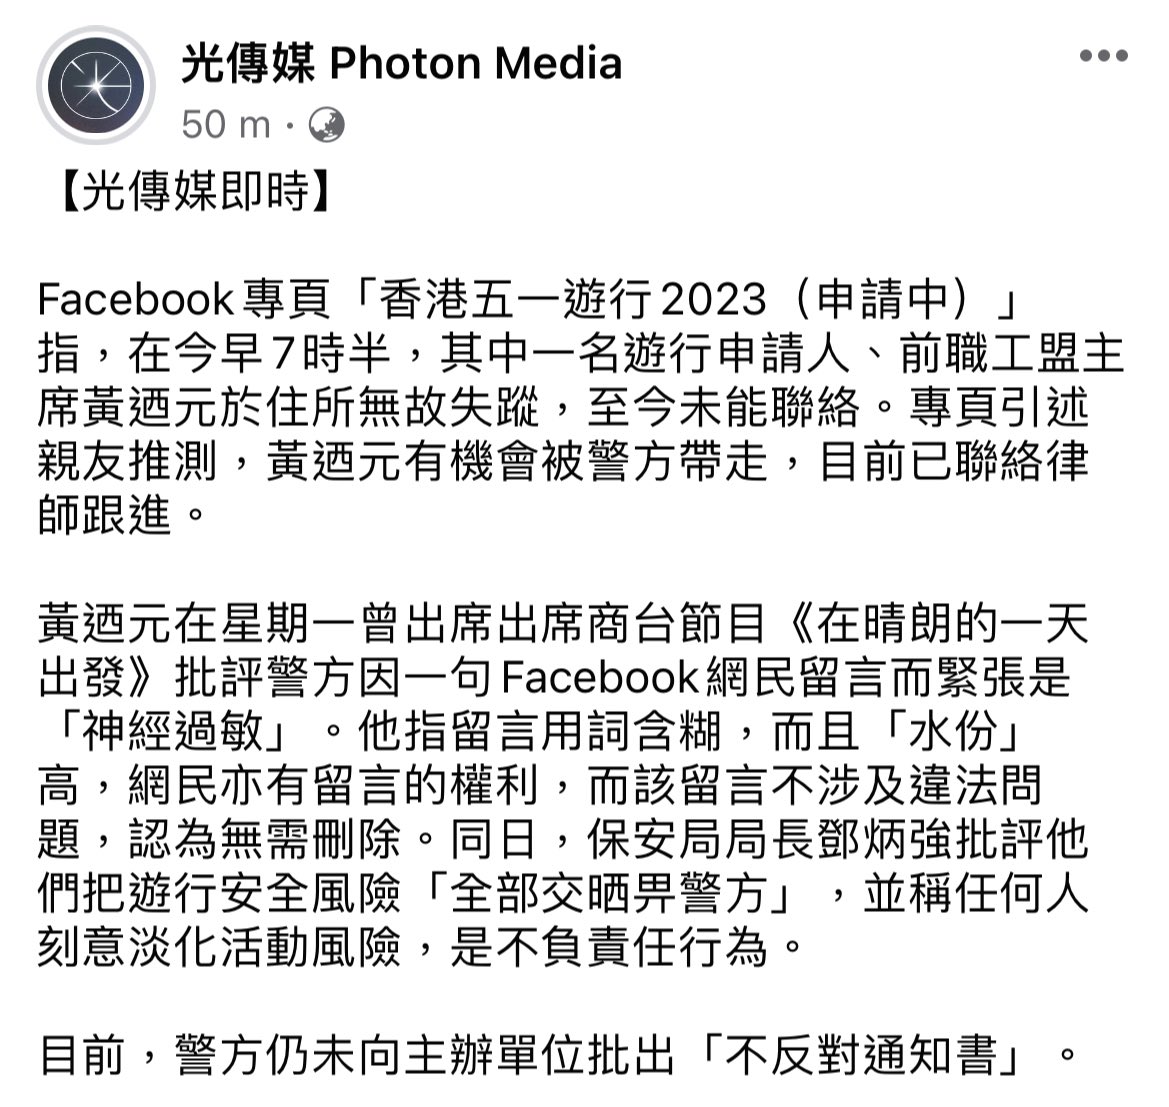 One of the organisers of the Labour Day Rally is missing. His family believed that he might be detained by #hongkongpolice